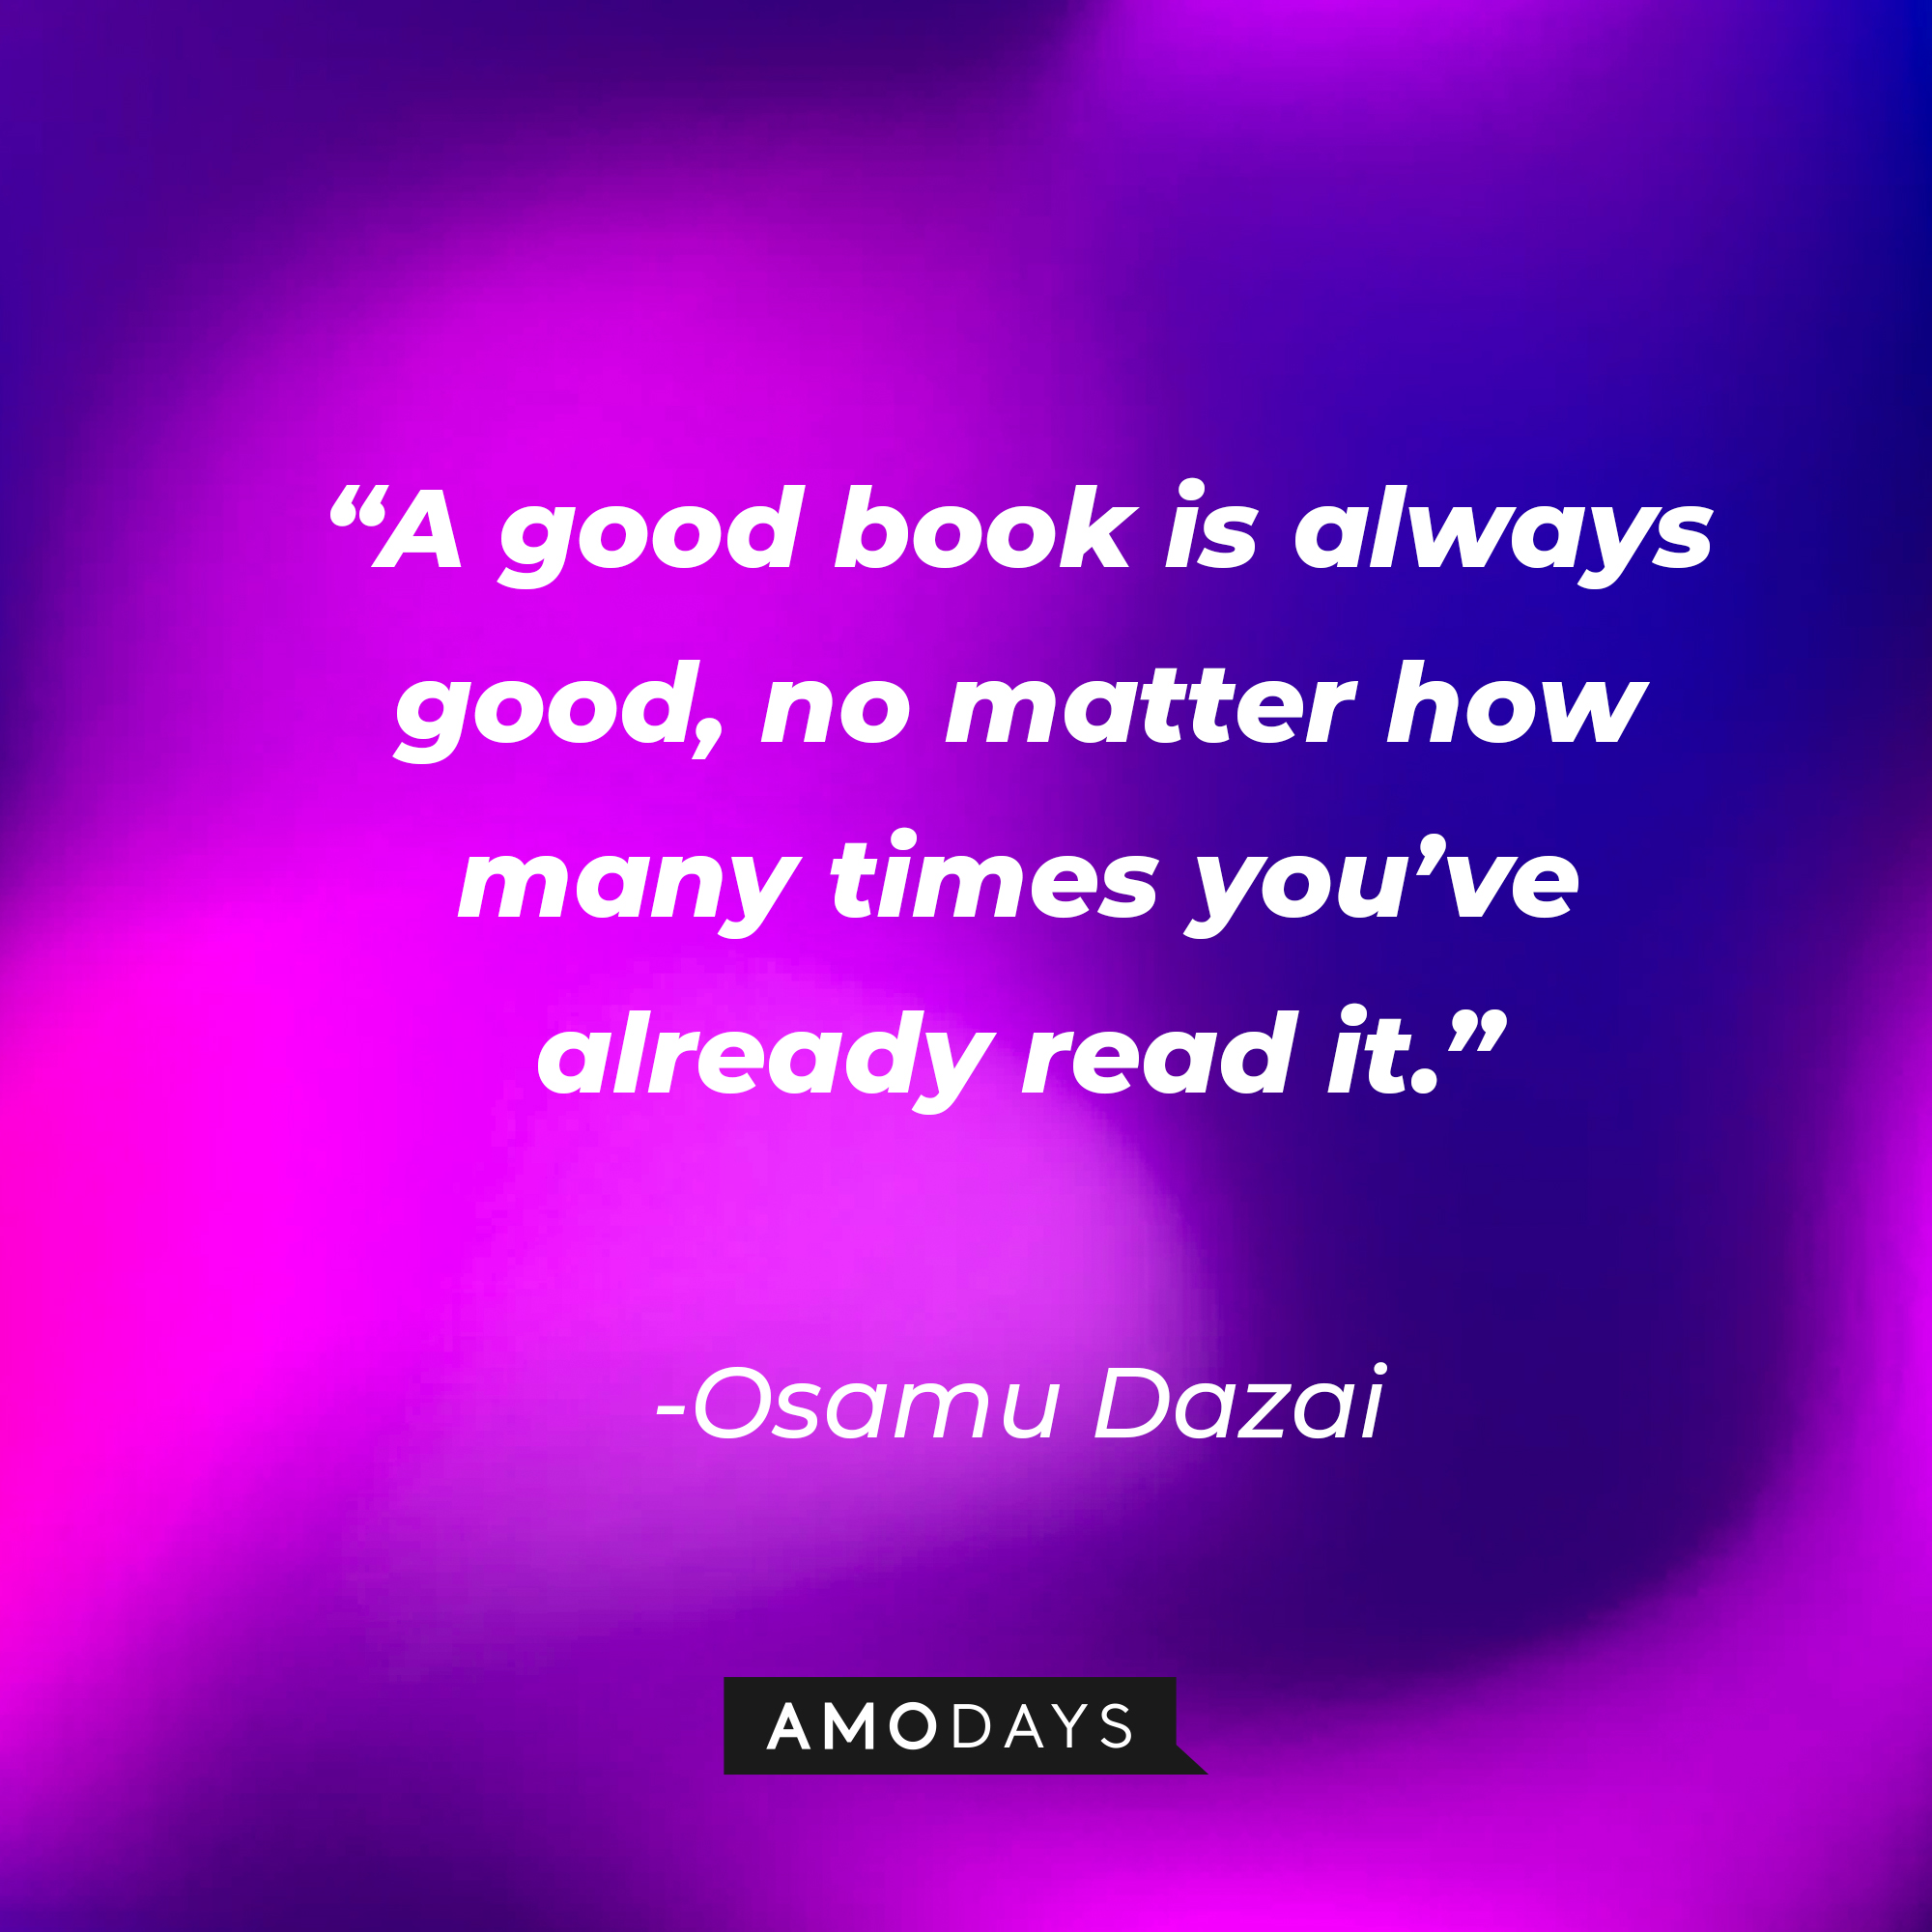 Osamu Dazai’s quote: “A good book is always good, no matter how many times you’ve already read it.” | Source: AmoDays